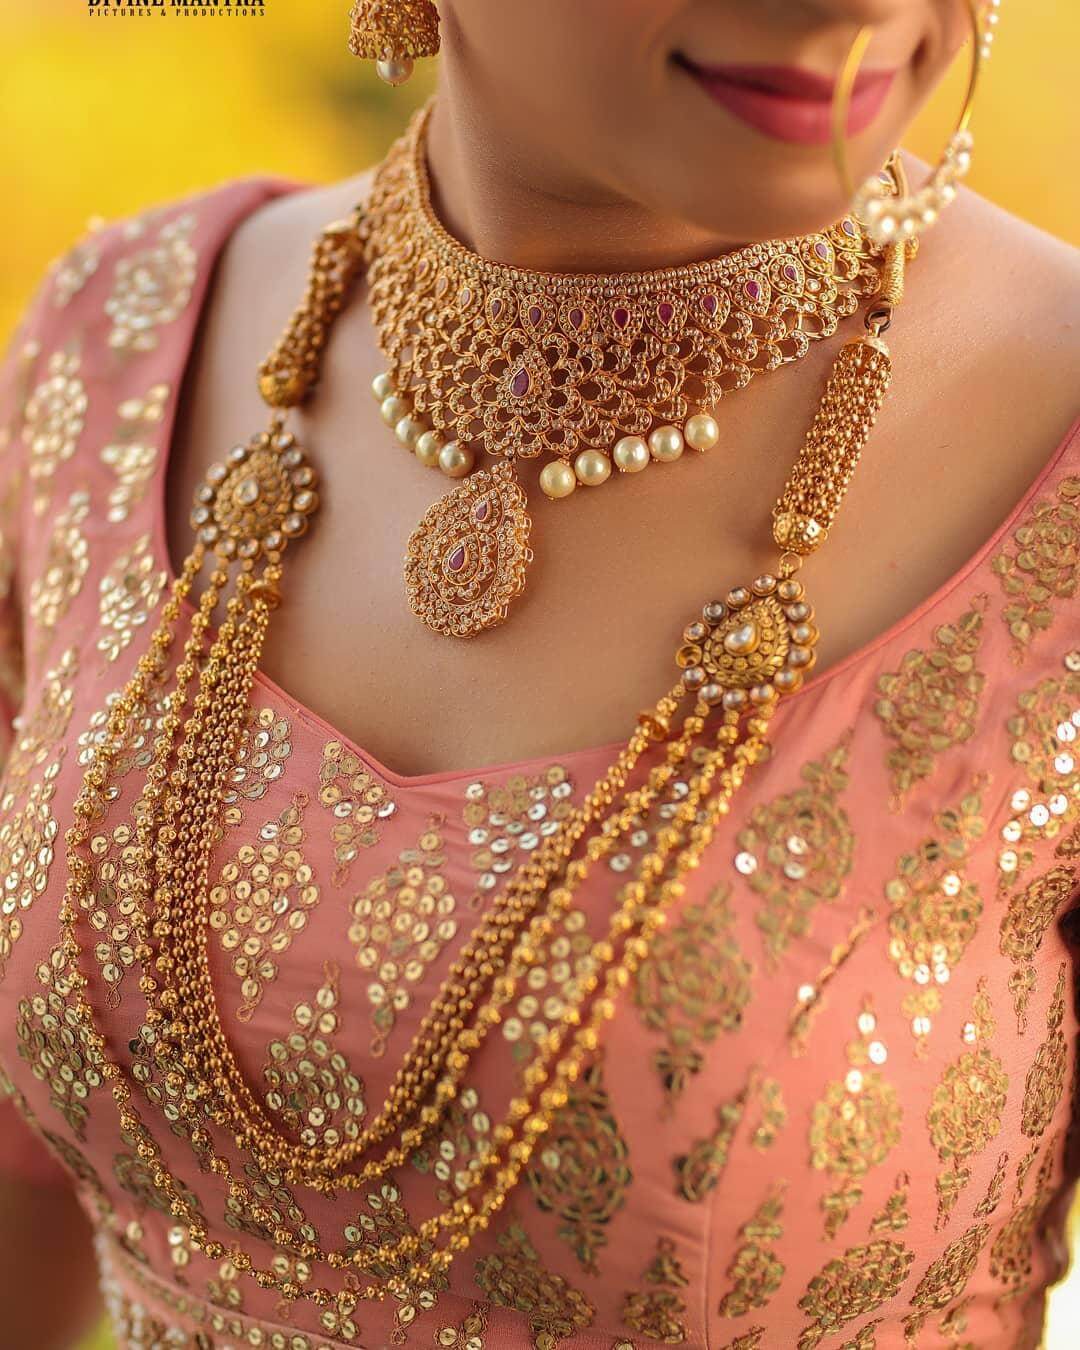 Stunning Bridal Gold Necklace Designs For The SwoonWorthy Brides of 2021